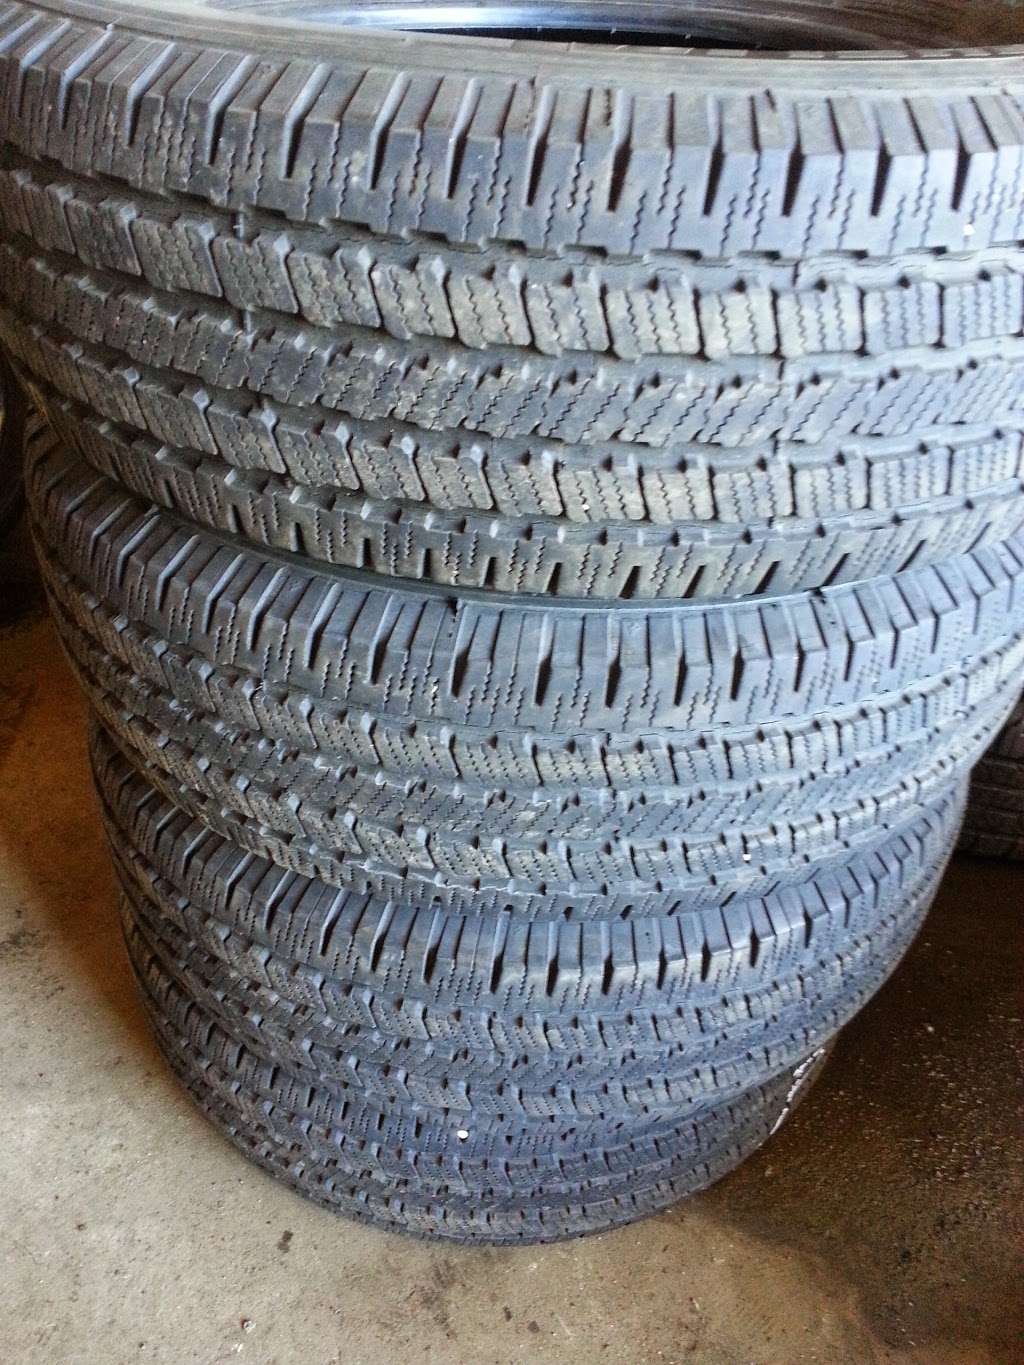 Lopez Tire Shop | 3641 Michigan St, New Chicago, IN 46342 | Phone: (219) 962-1337